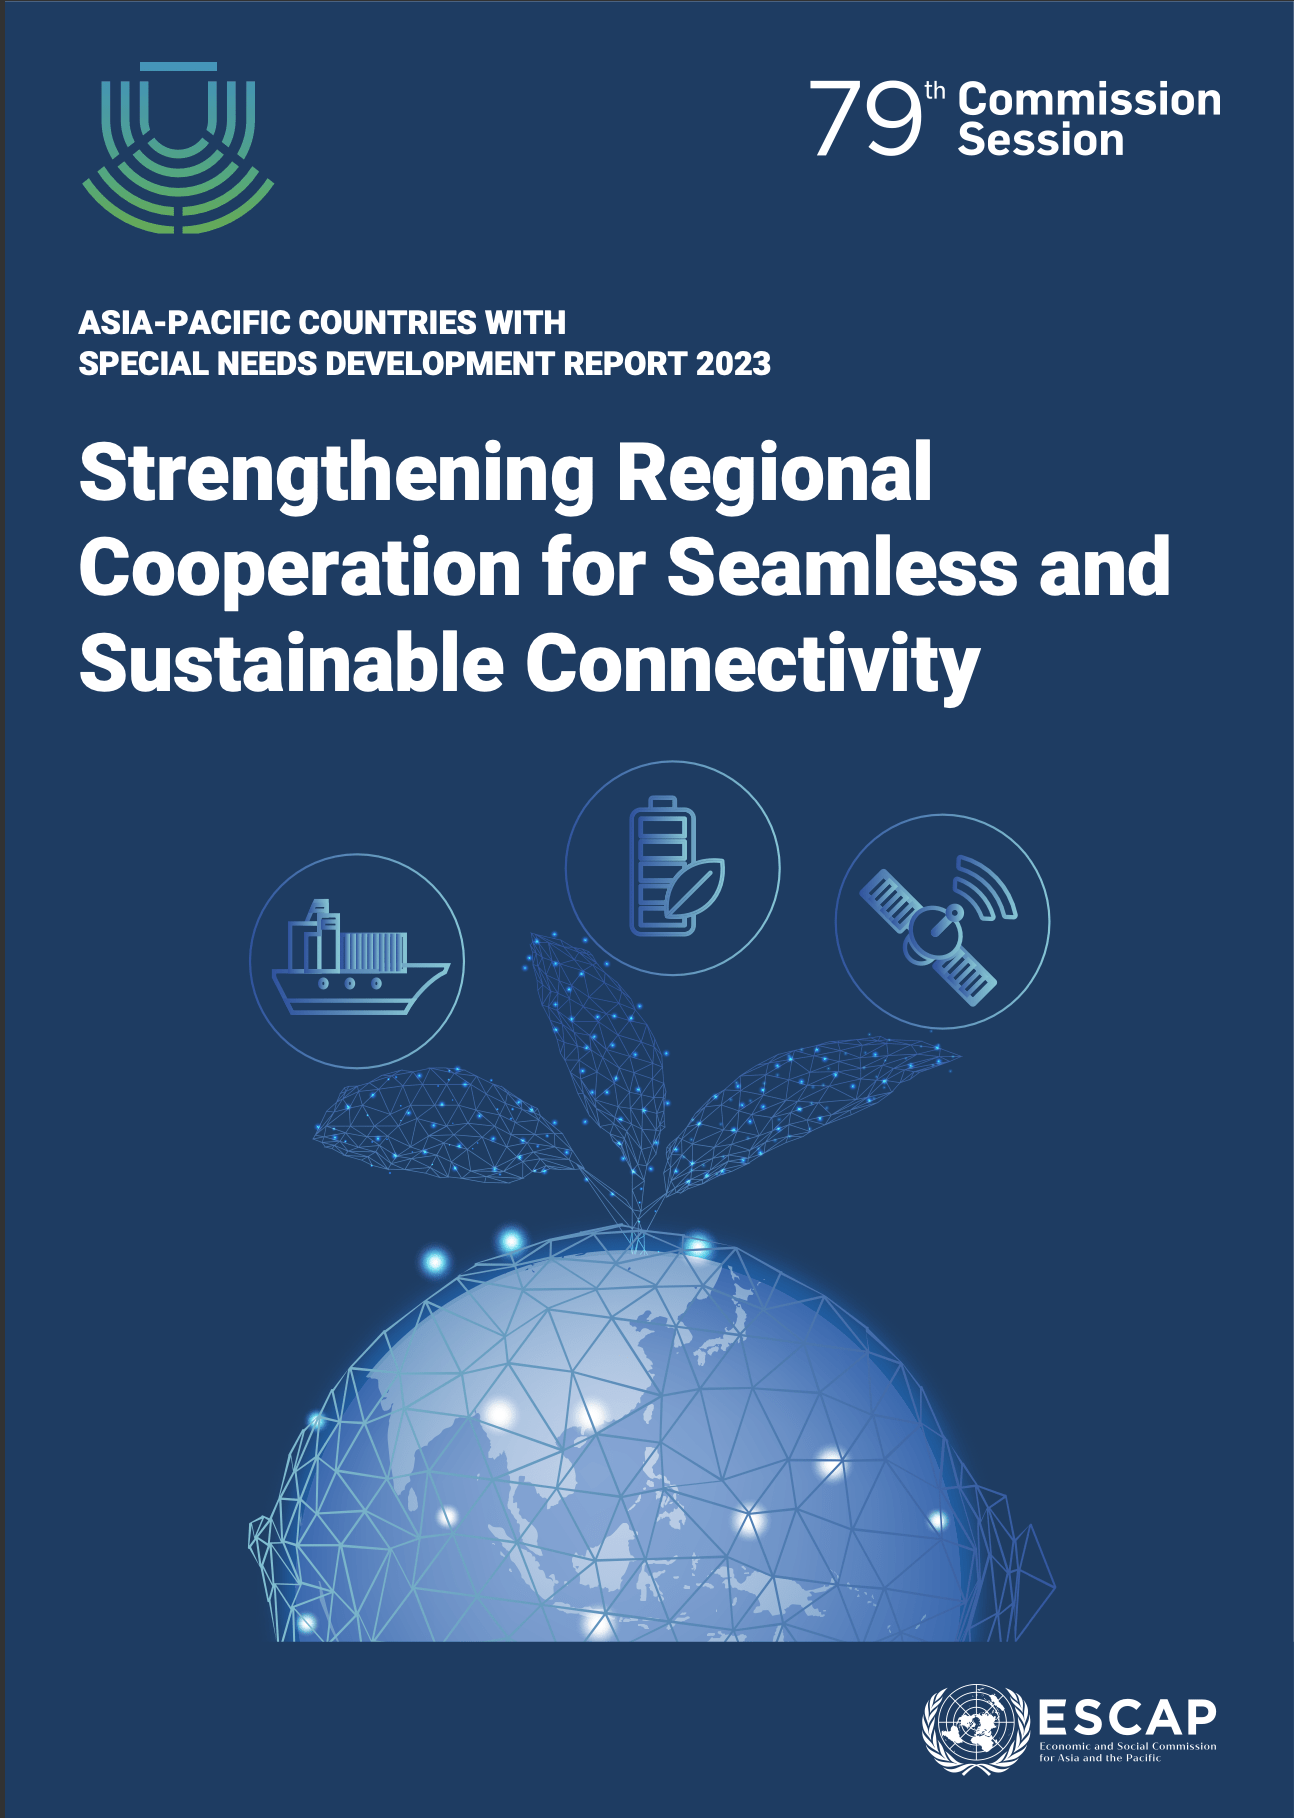 Strengthening Regional Cooperation for Seamless and Sustainable Connectivity